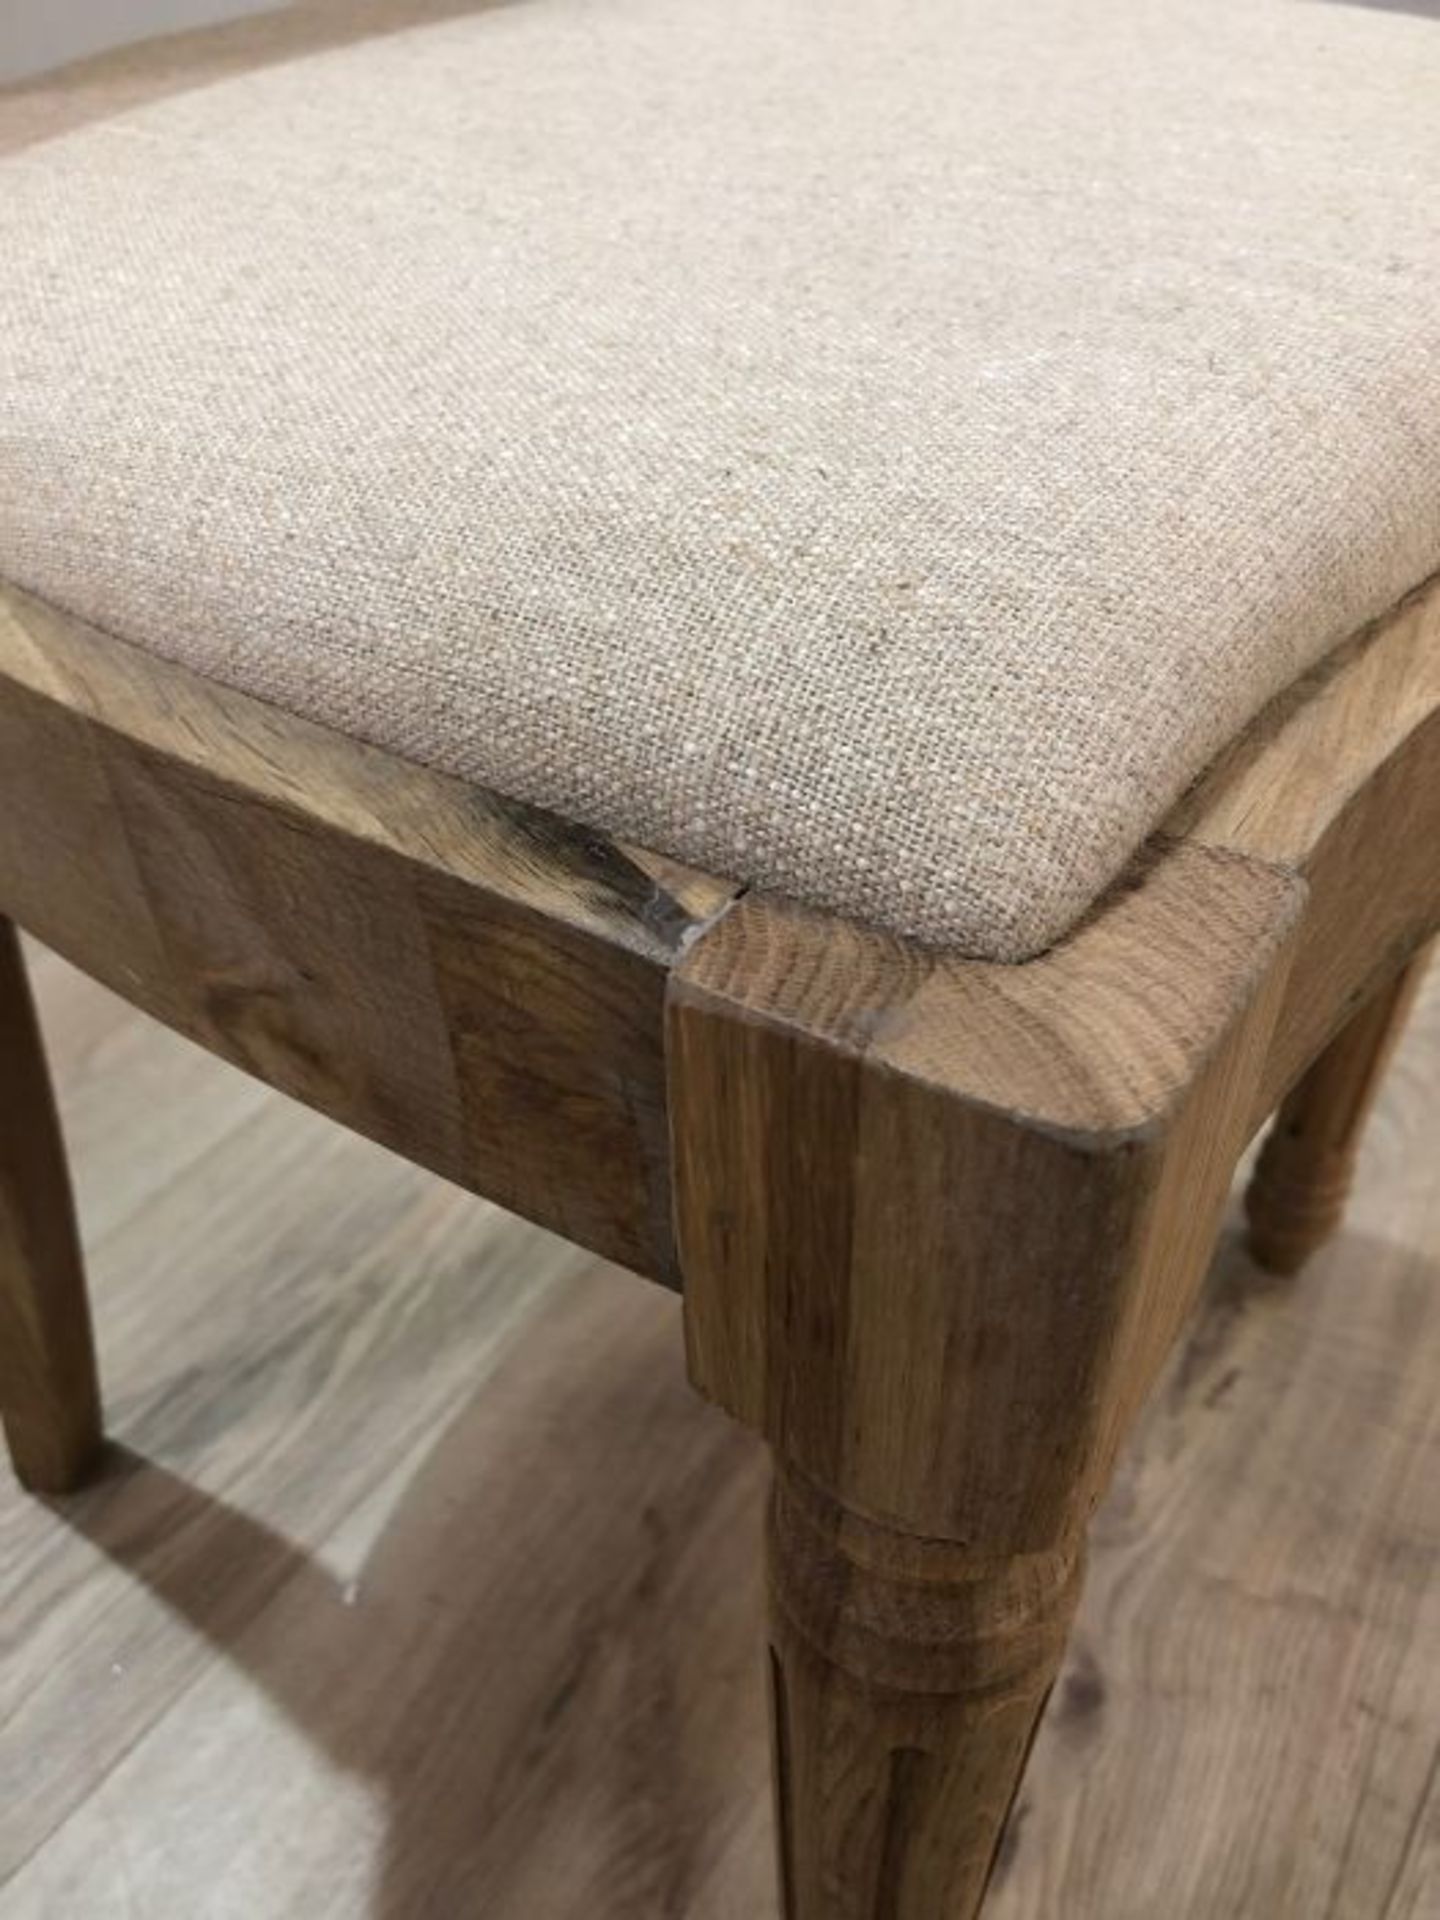 Cox & Cox Cleo Oak Dining Chair RRP œ425.00 (PLT B000738) The light tones in the weathered oak frame - Image 2 of 4